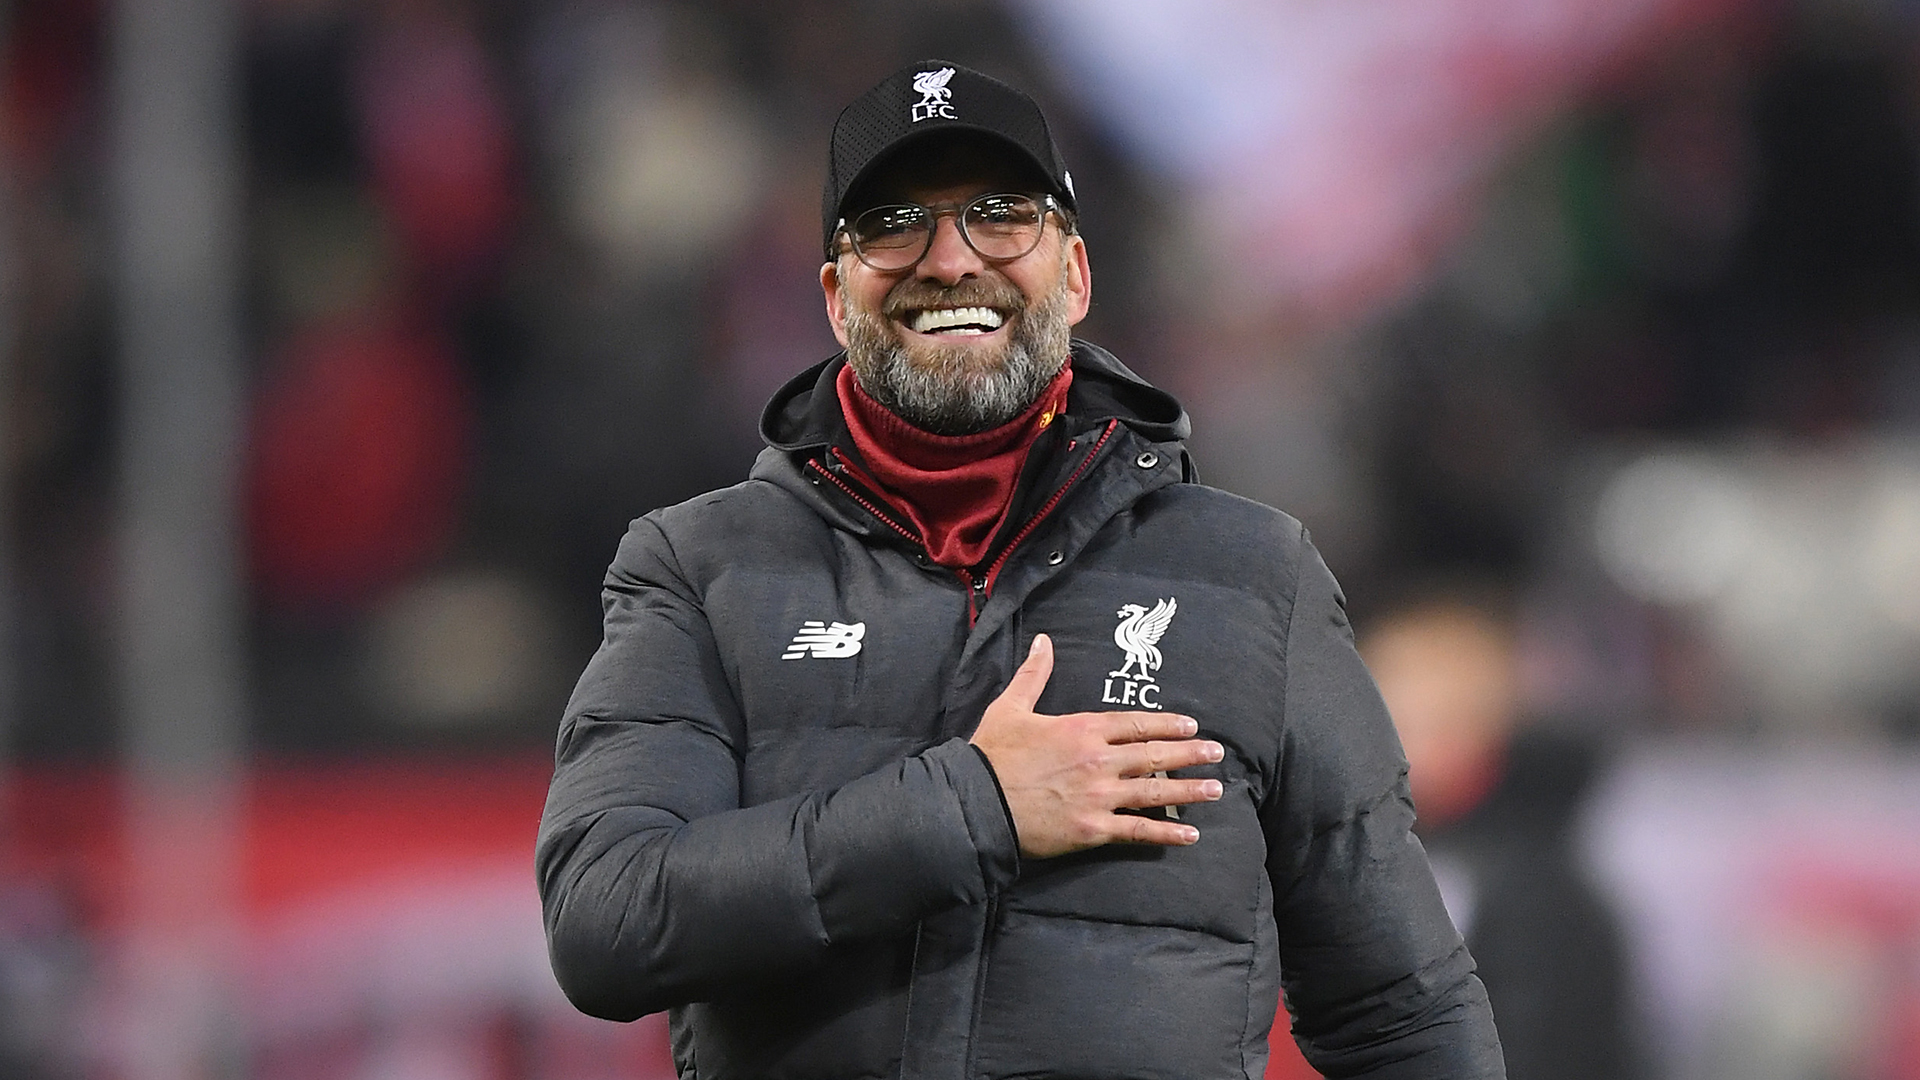 'Who cares about points in December?' - Klopp expects tight games as Liverpool continue Premier League title push